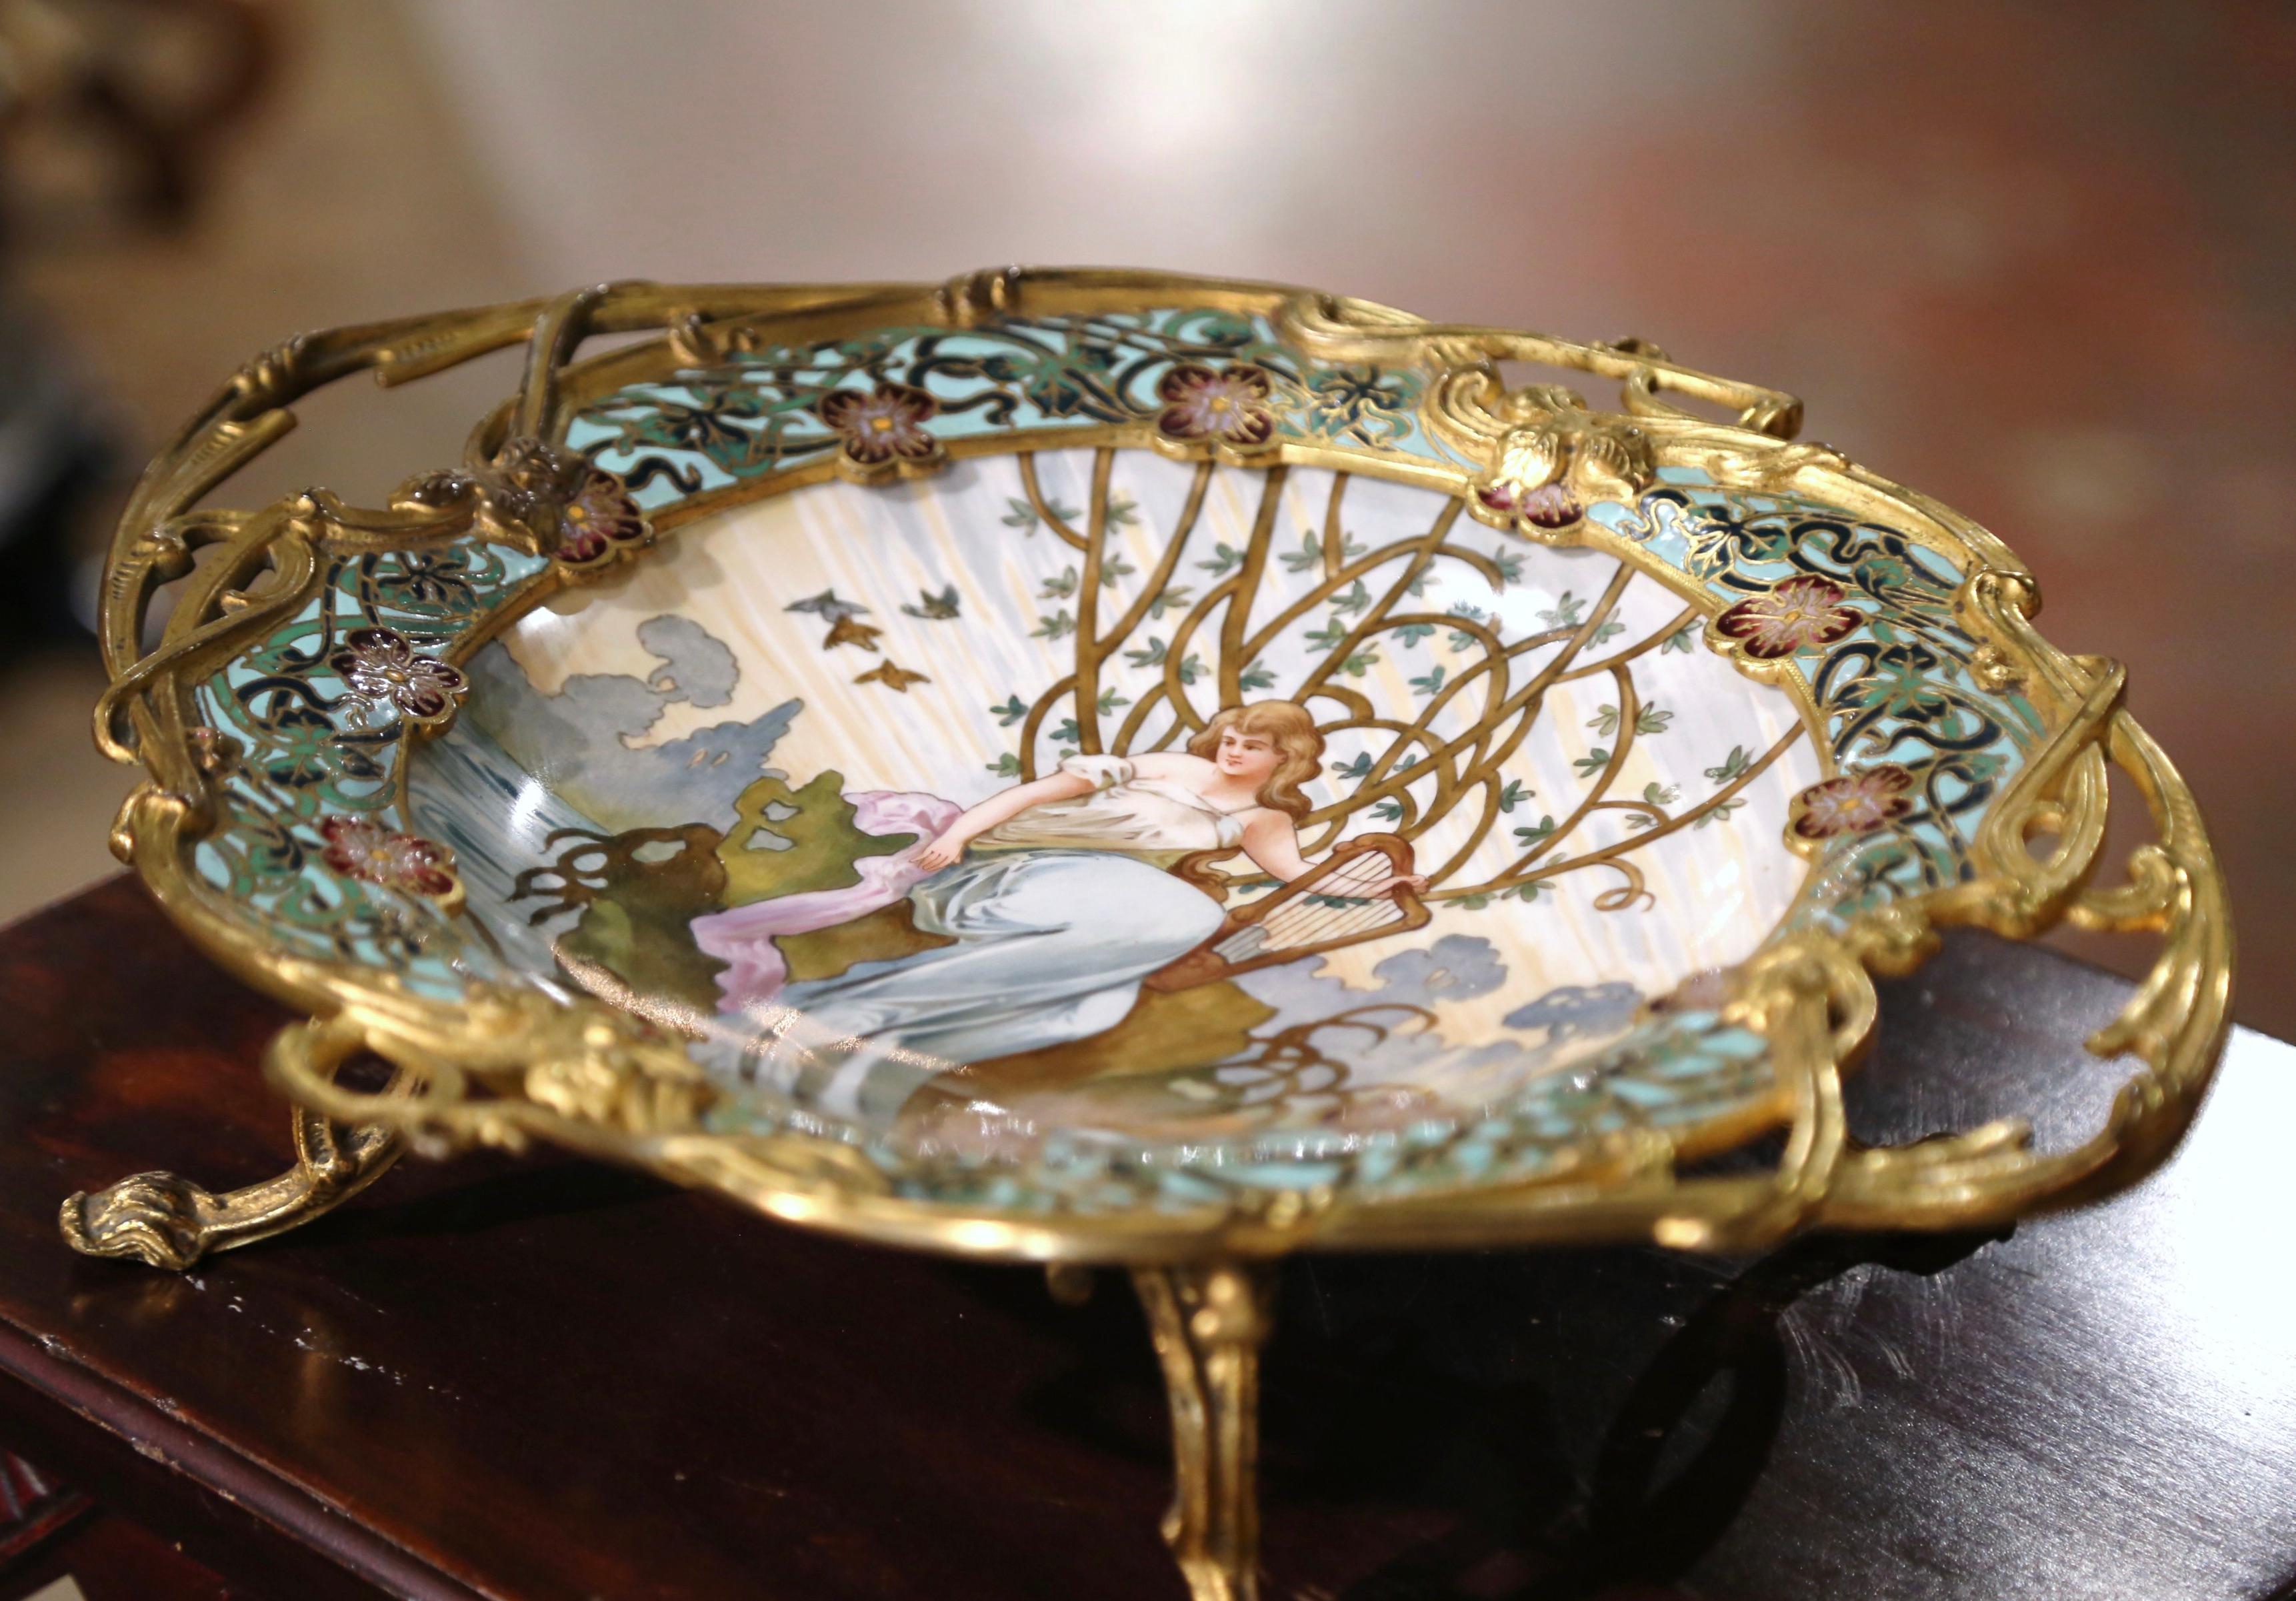 Bronze 19th Century French Champlevé Enamel and Porcelain Centerpiece Signed Tisserand For Sale